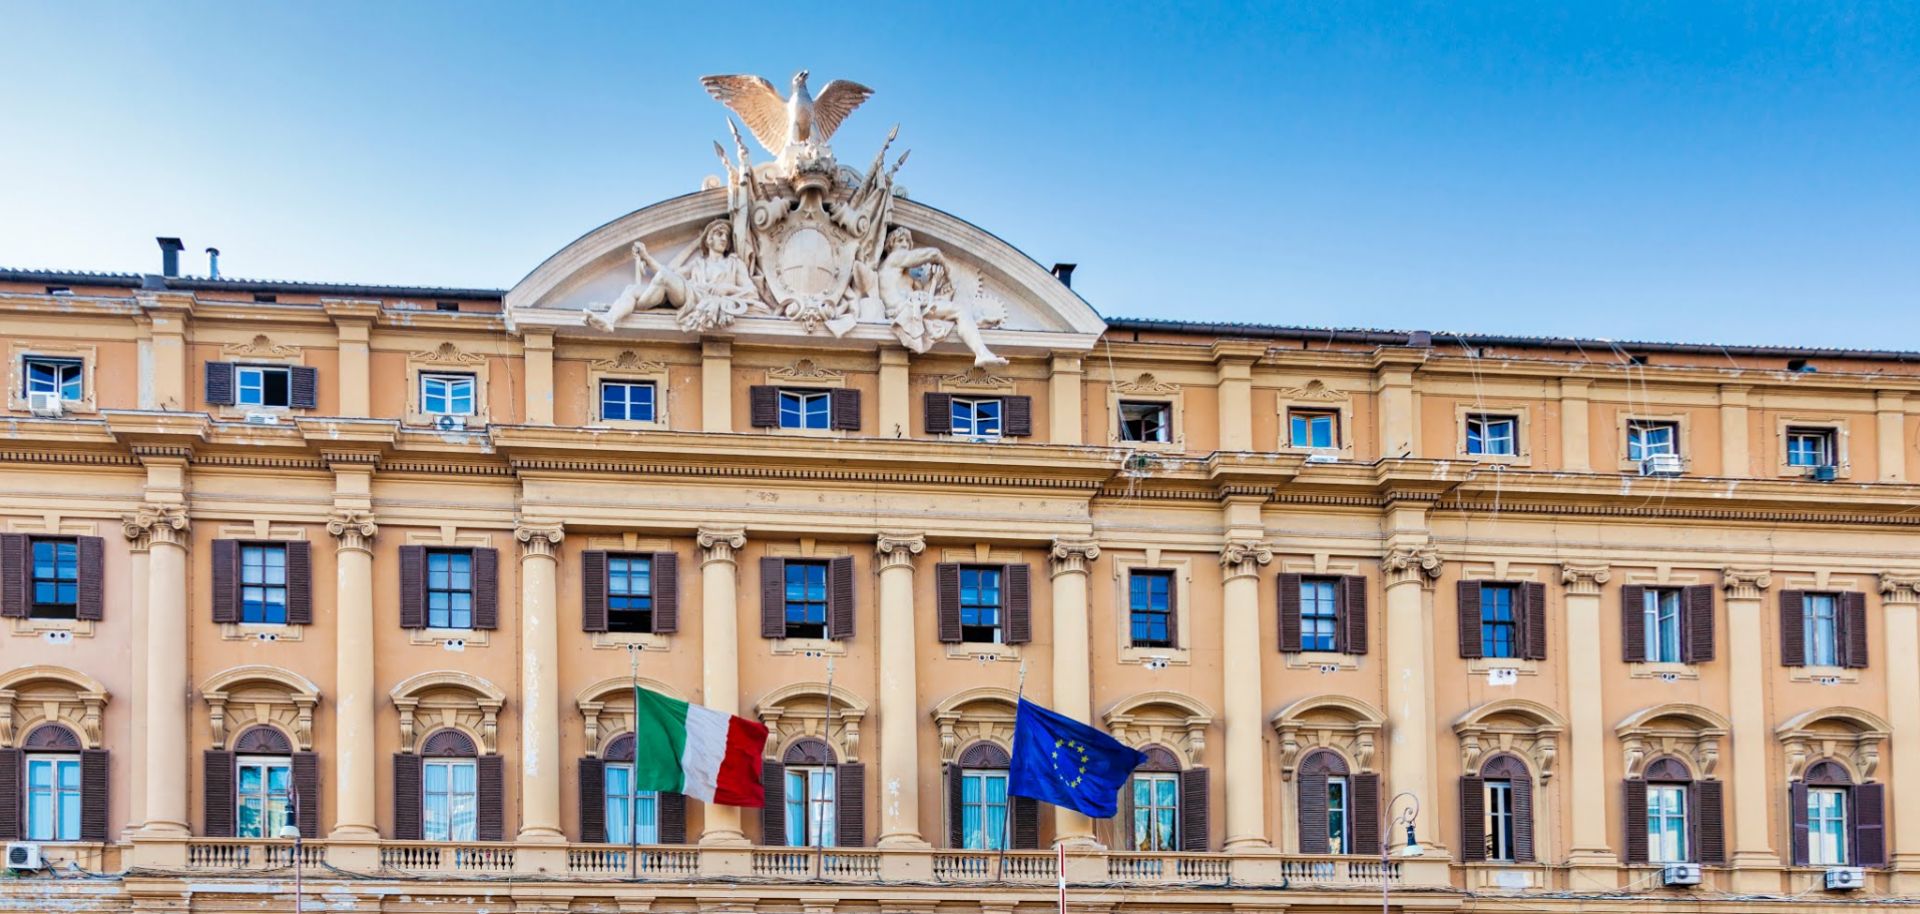 The Italian Ministry of Finance and Economics